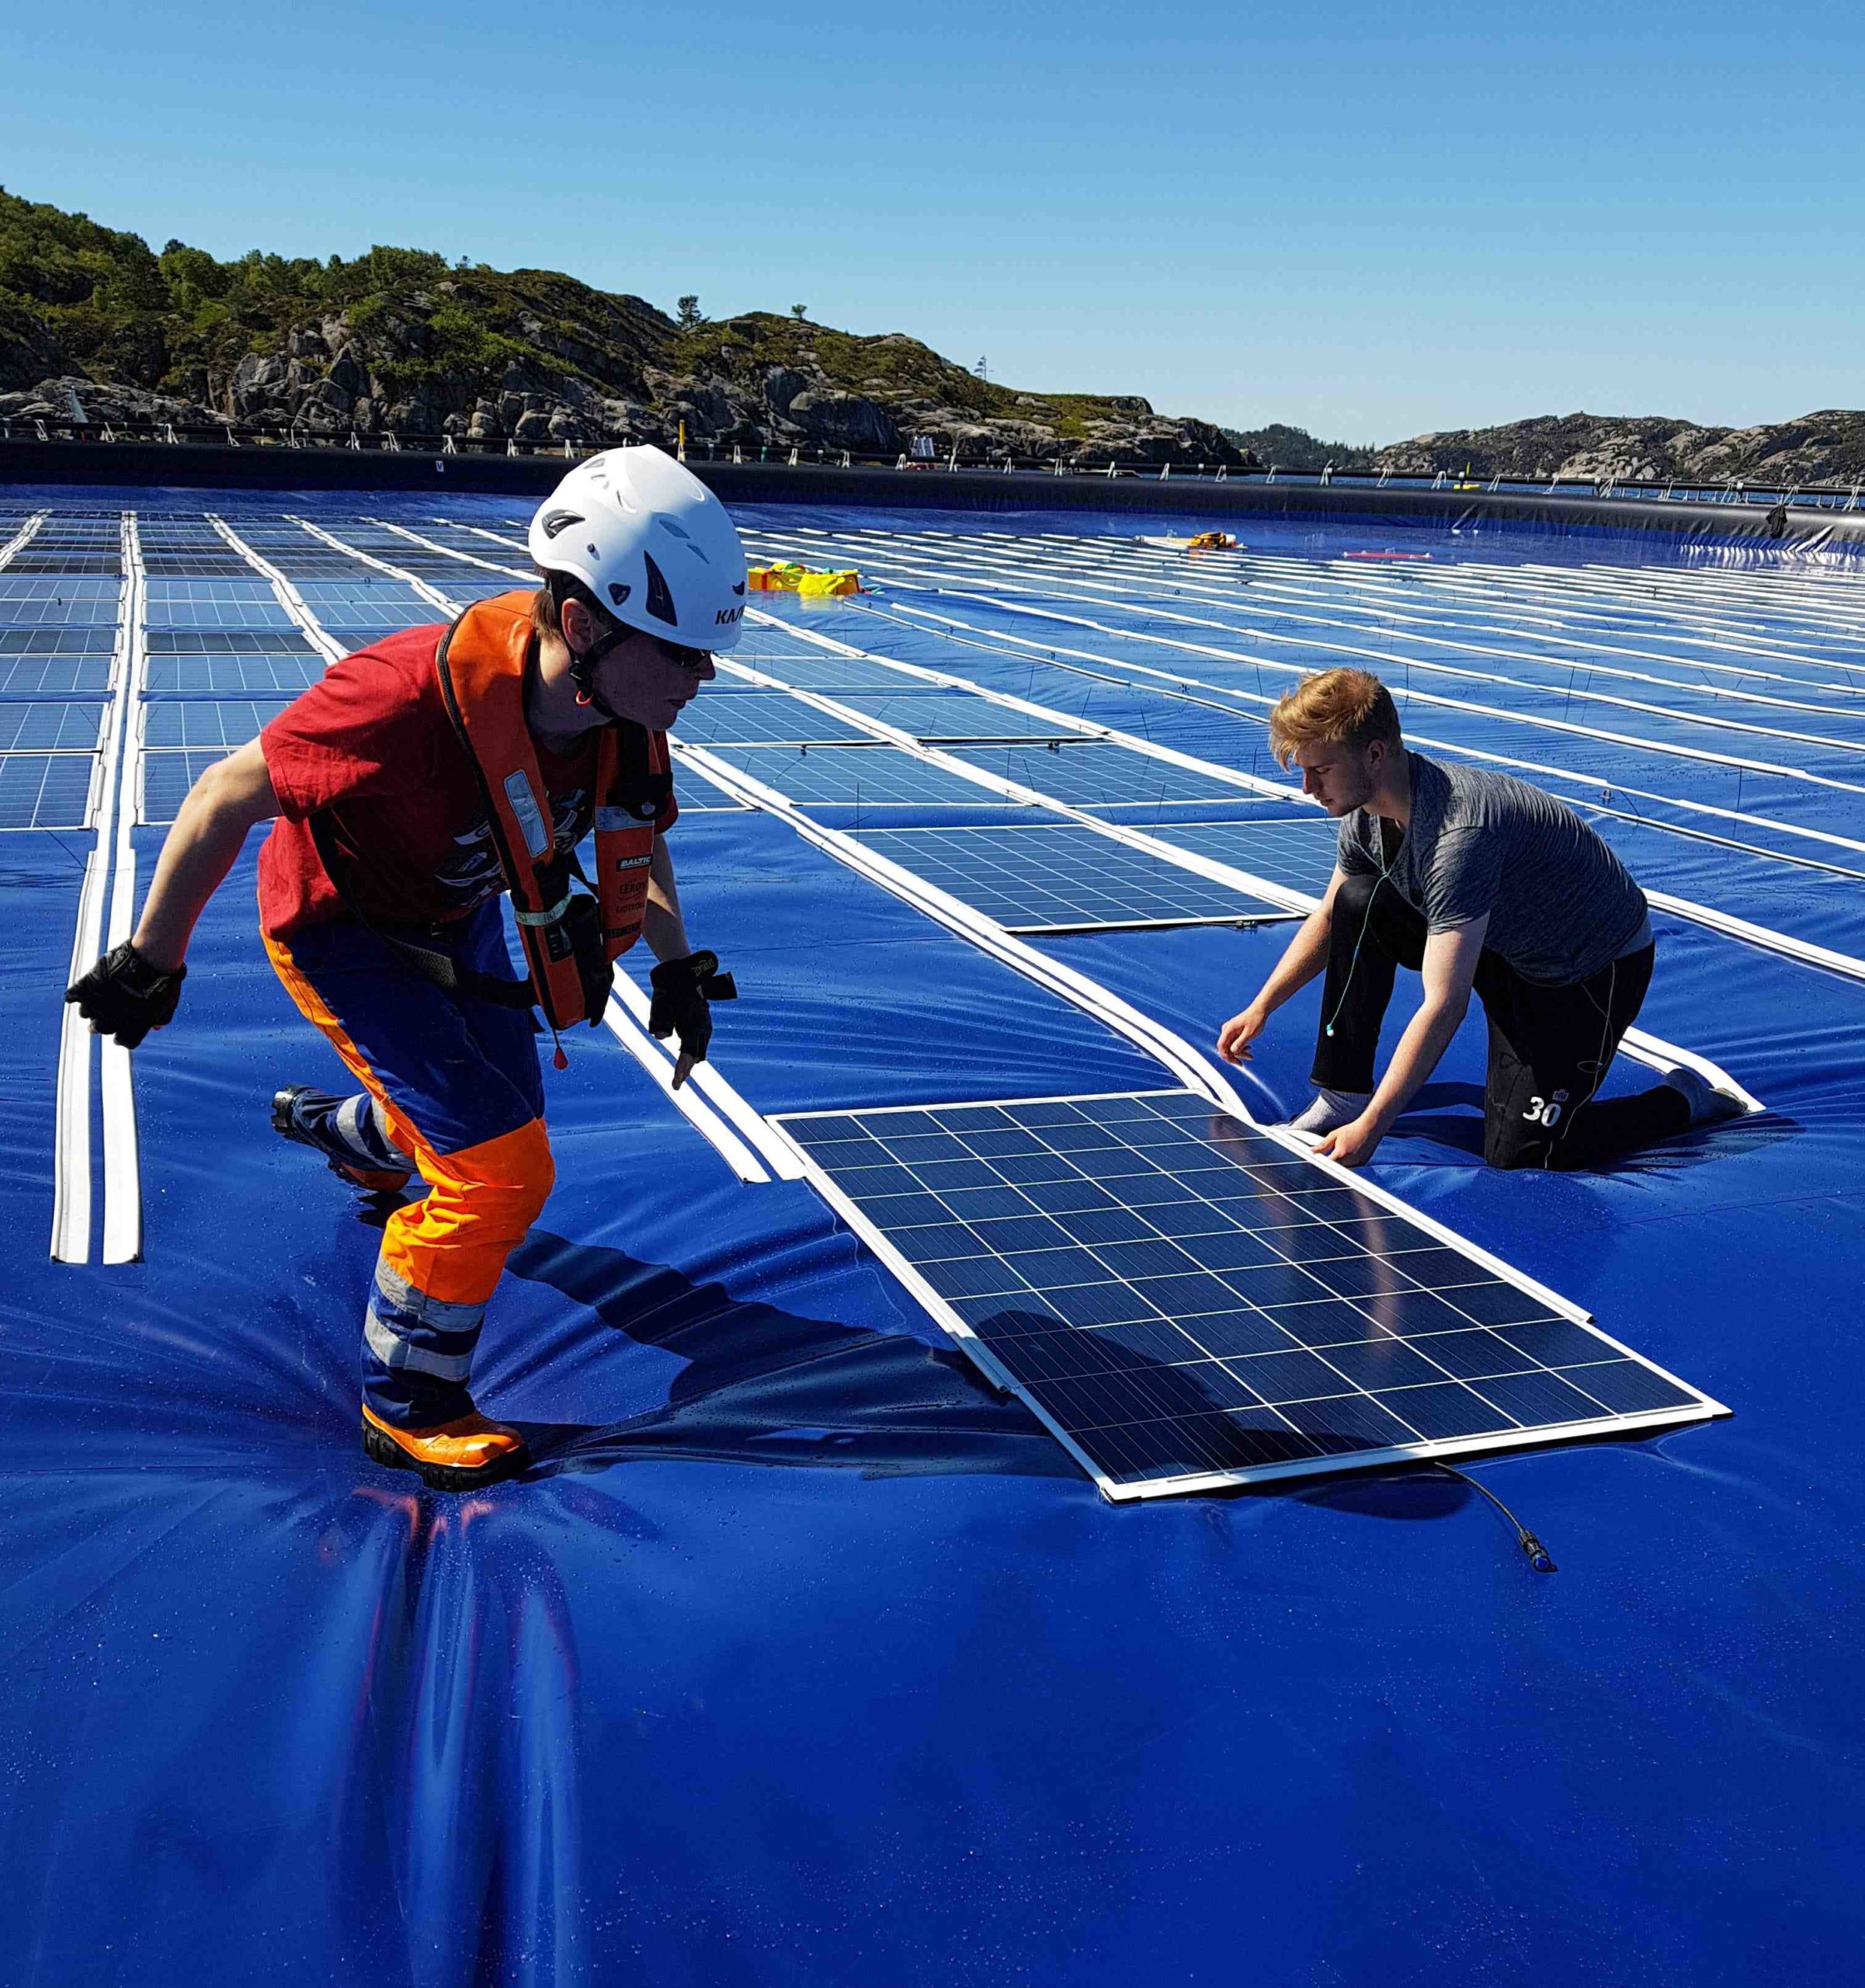 Who is the best solar panel company?